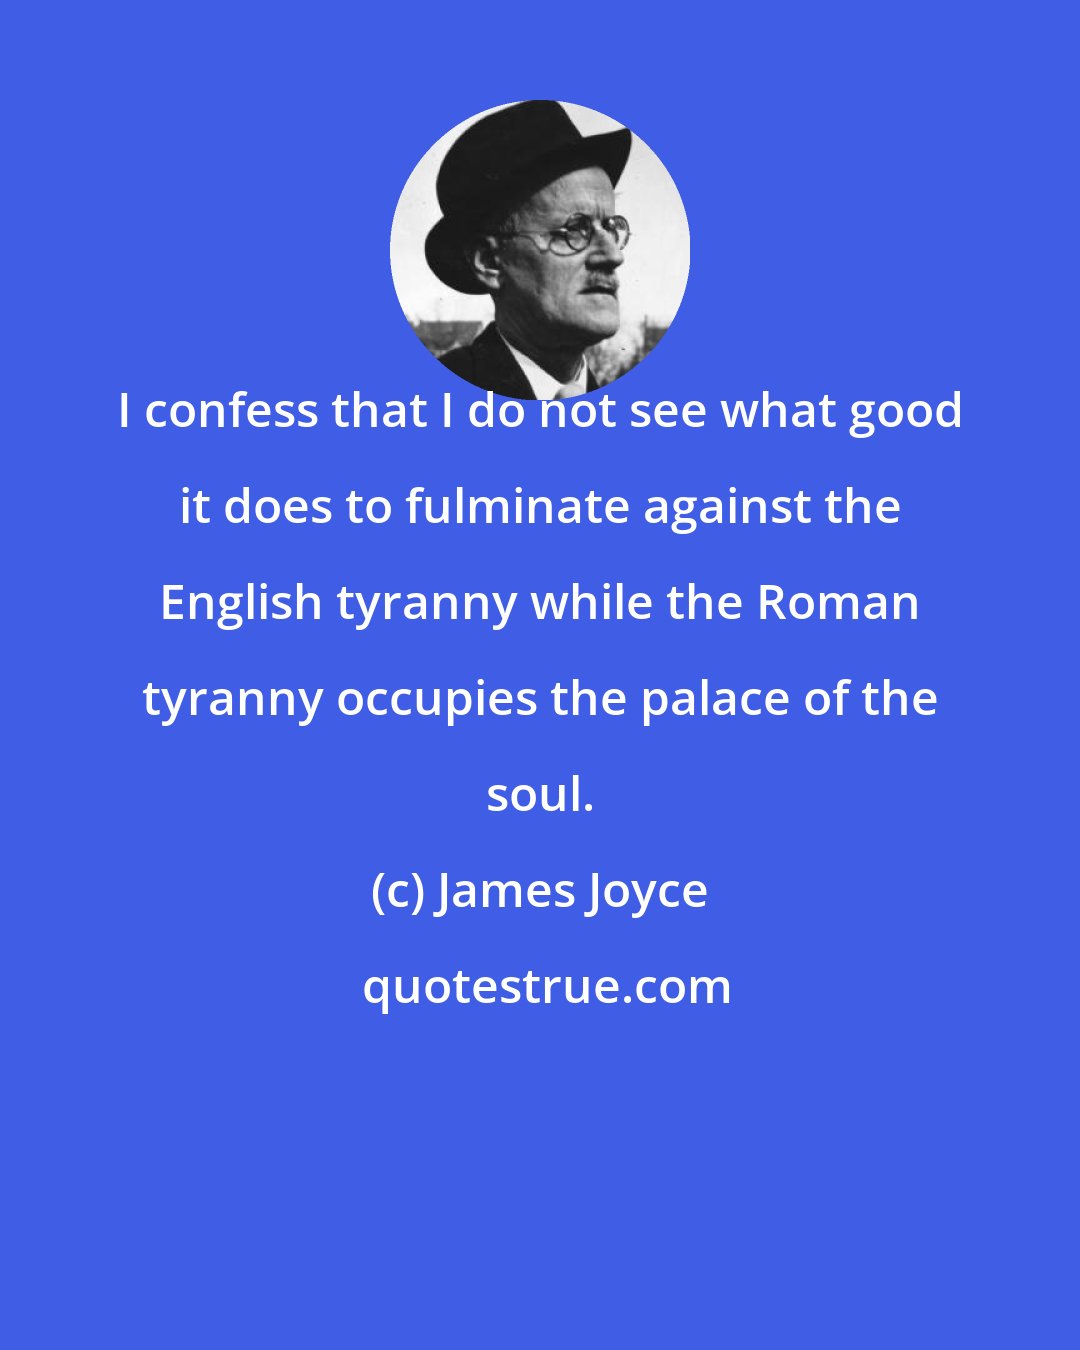 James Joyce: I confess that I do not see what good it does to fulminate against the English tyranny while the Roman tyranny occupies the palace of the soul.